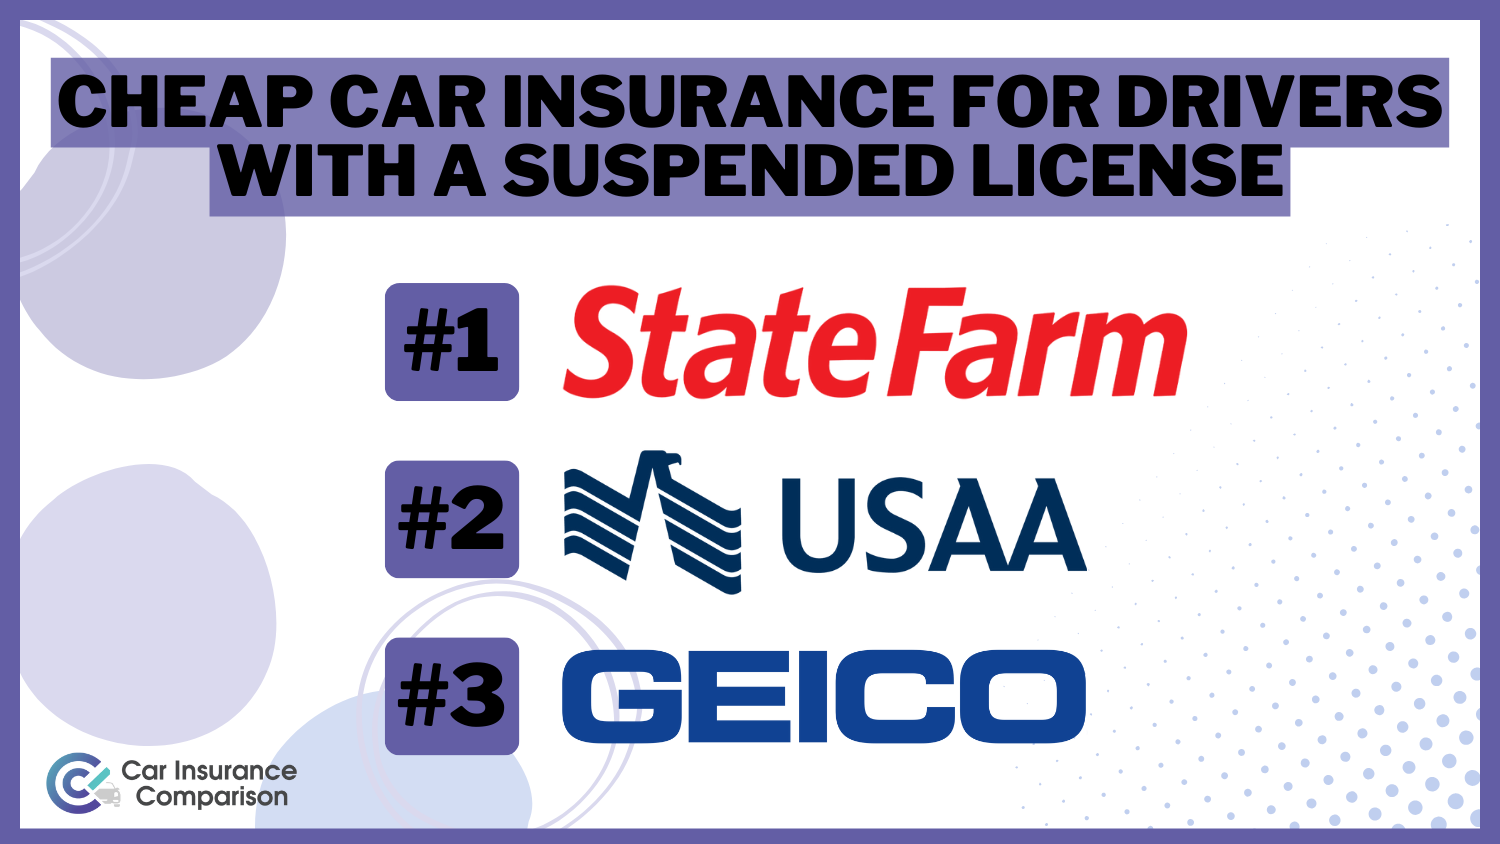 state farm usaa Geico Cheap Car Insurance for Drivers With a Suspended License